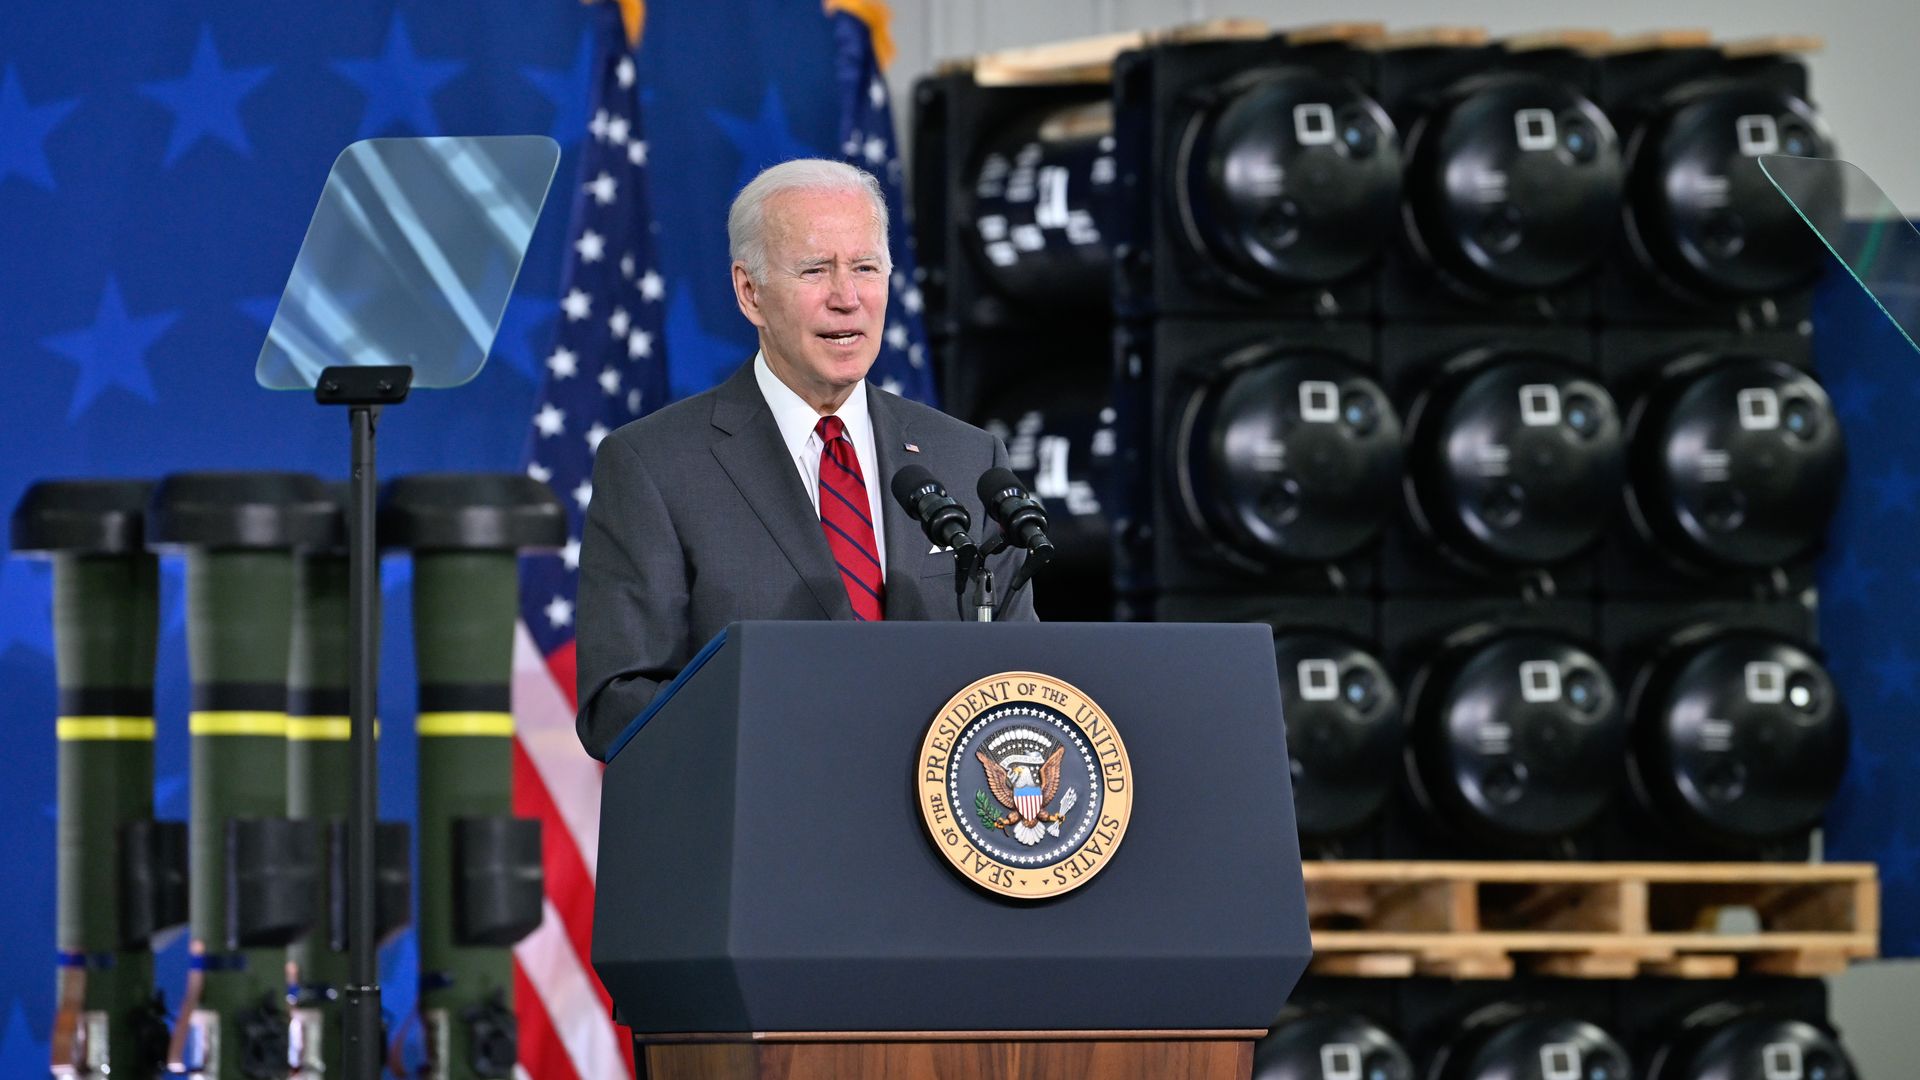 President Joe Biden delivers a speech during his visit at Lockheed Martin facility which manufactures weapon systems such as Javelin anti-tank missiles, on May 3.